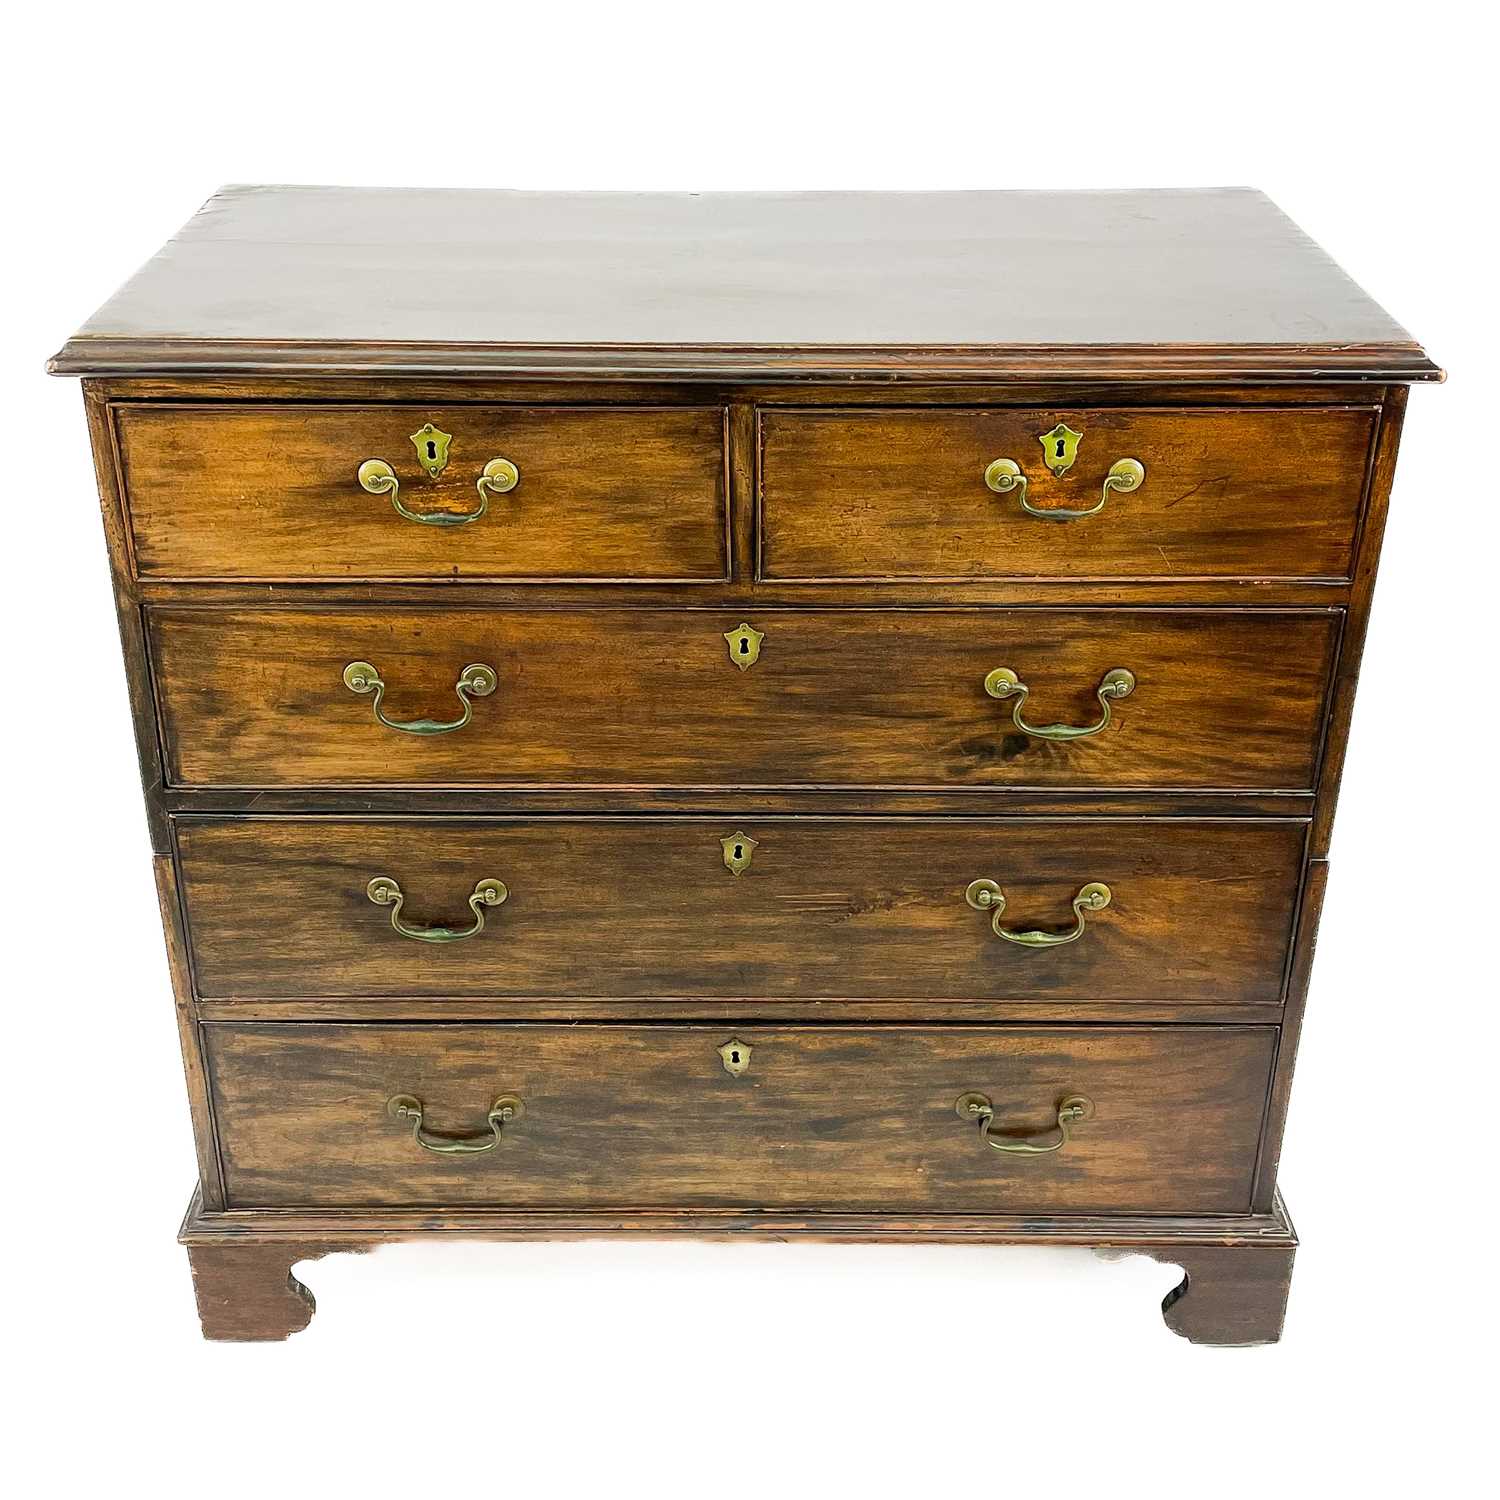 An early George III mahogany chest. - Image 3 of 4